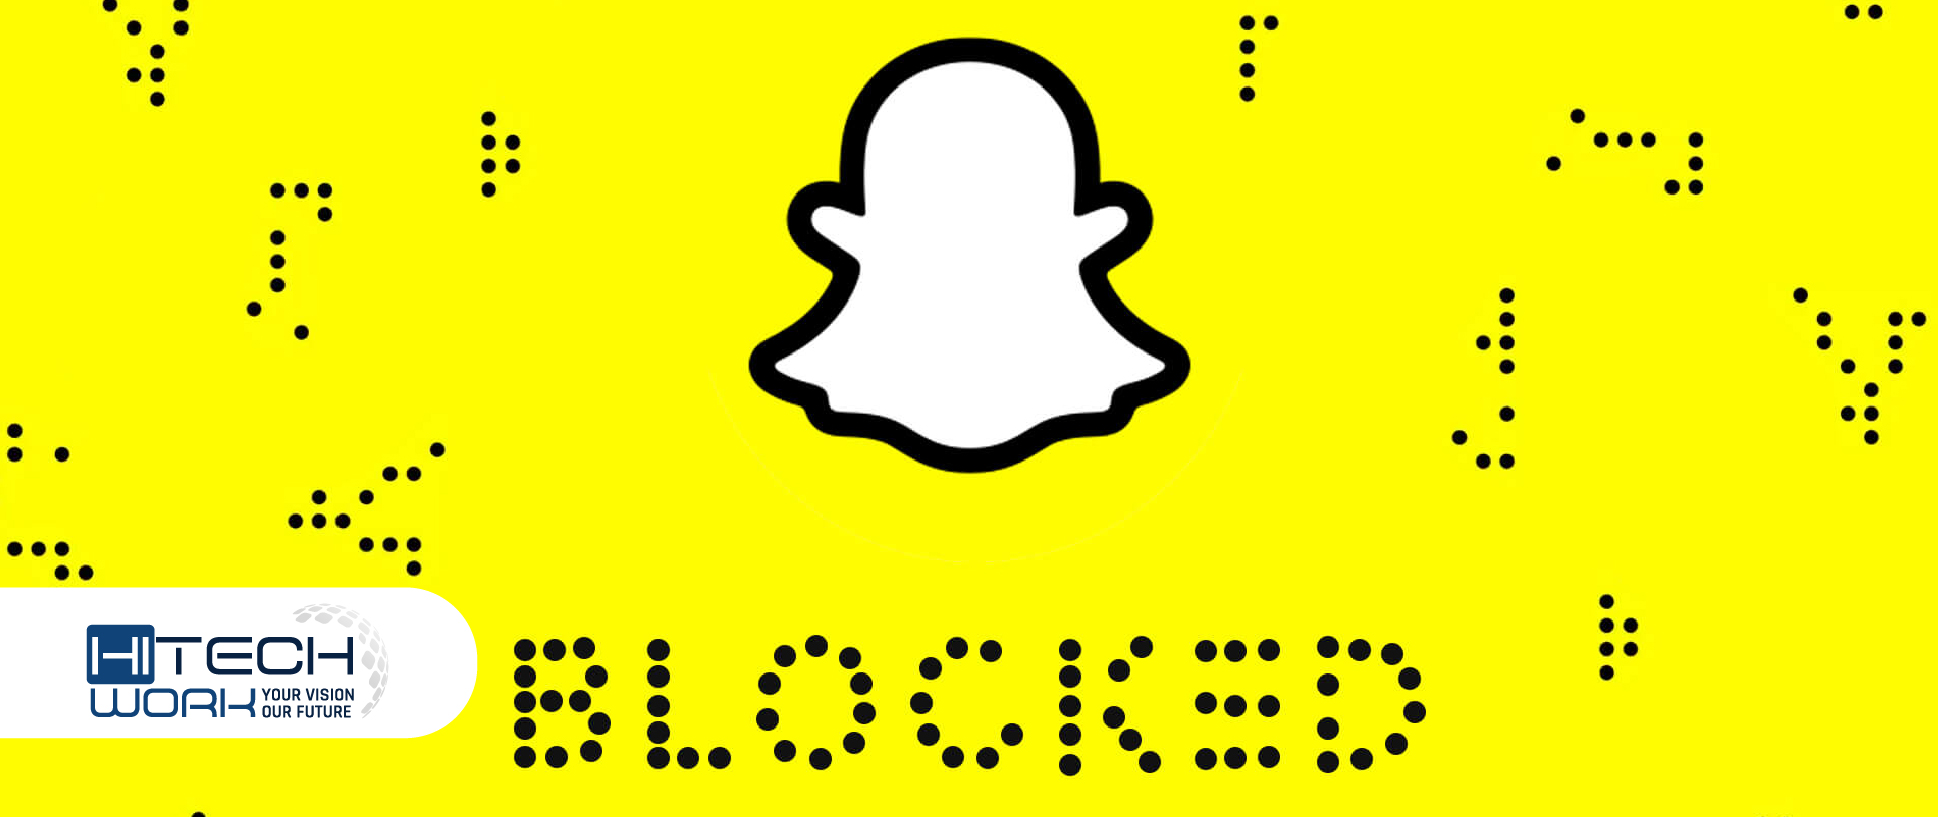 how to know if someone blocked you on Snapchat